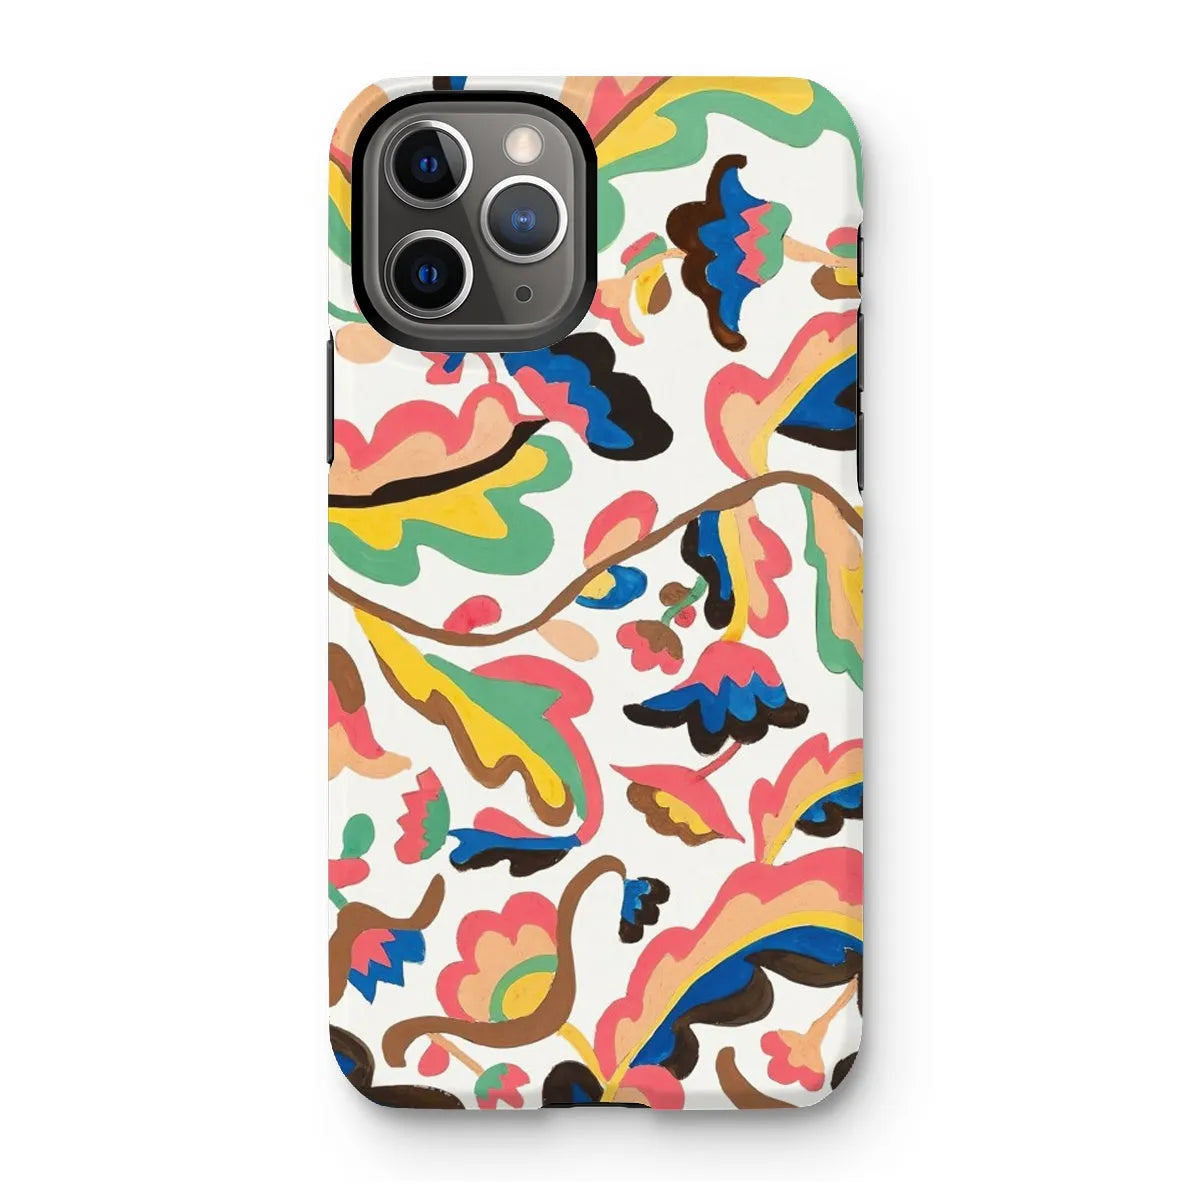 Colcha Floral Aesthetic Pattern Phone Case - Etna Wiswall - Iphone 11 Pro / Matte - Mobile Phone Cases - Aesthetic Art